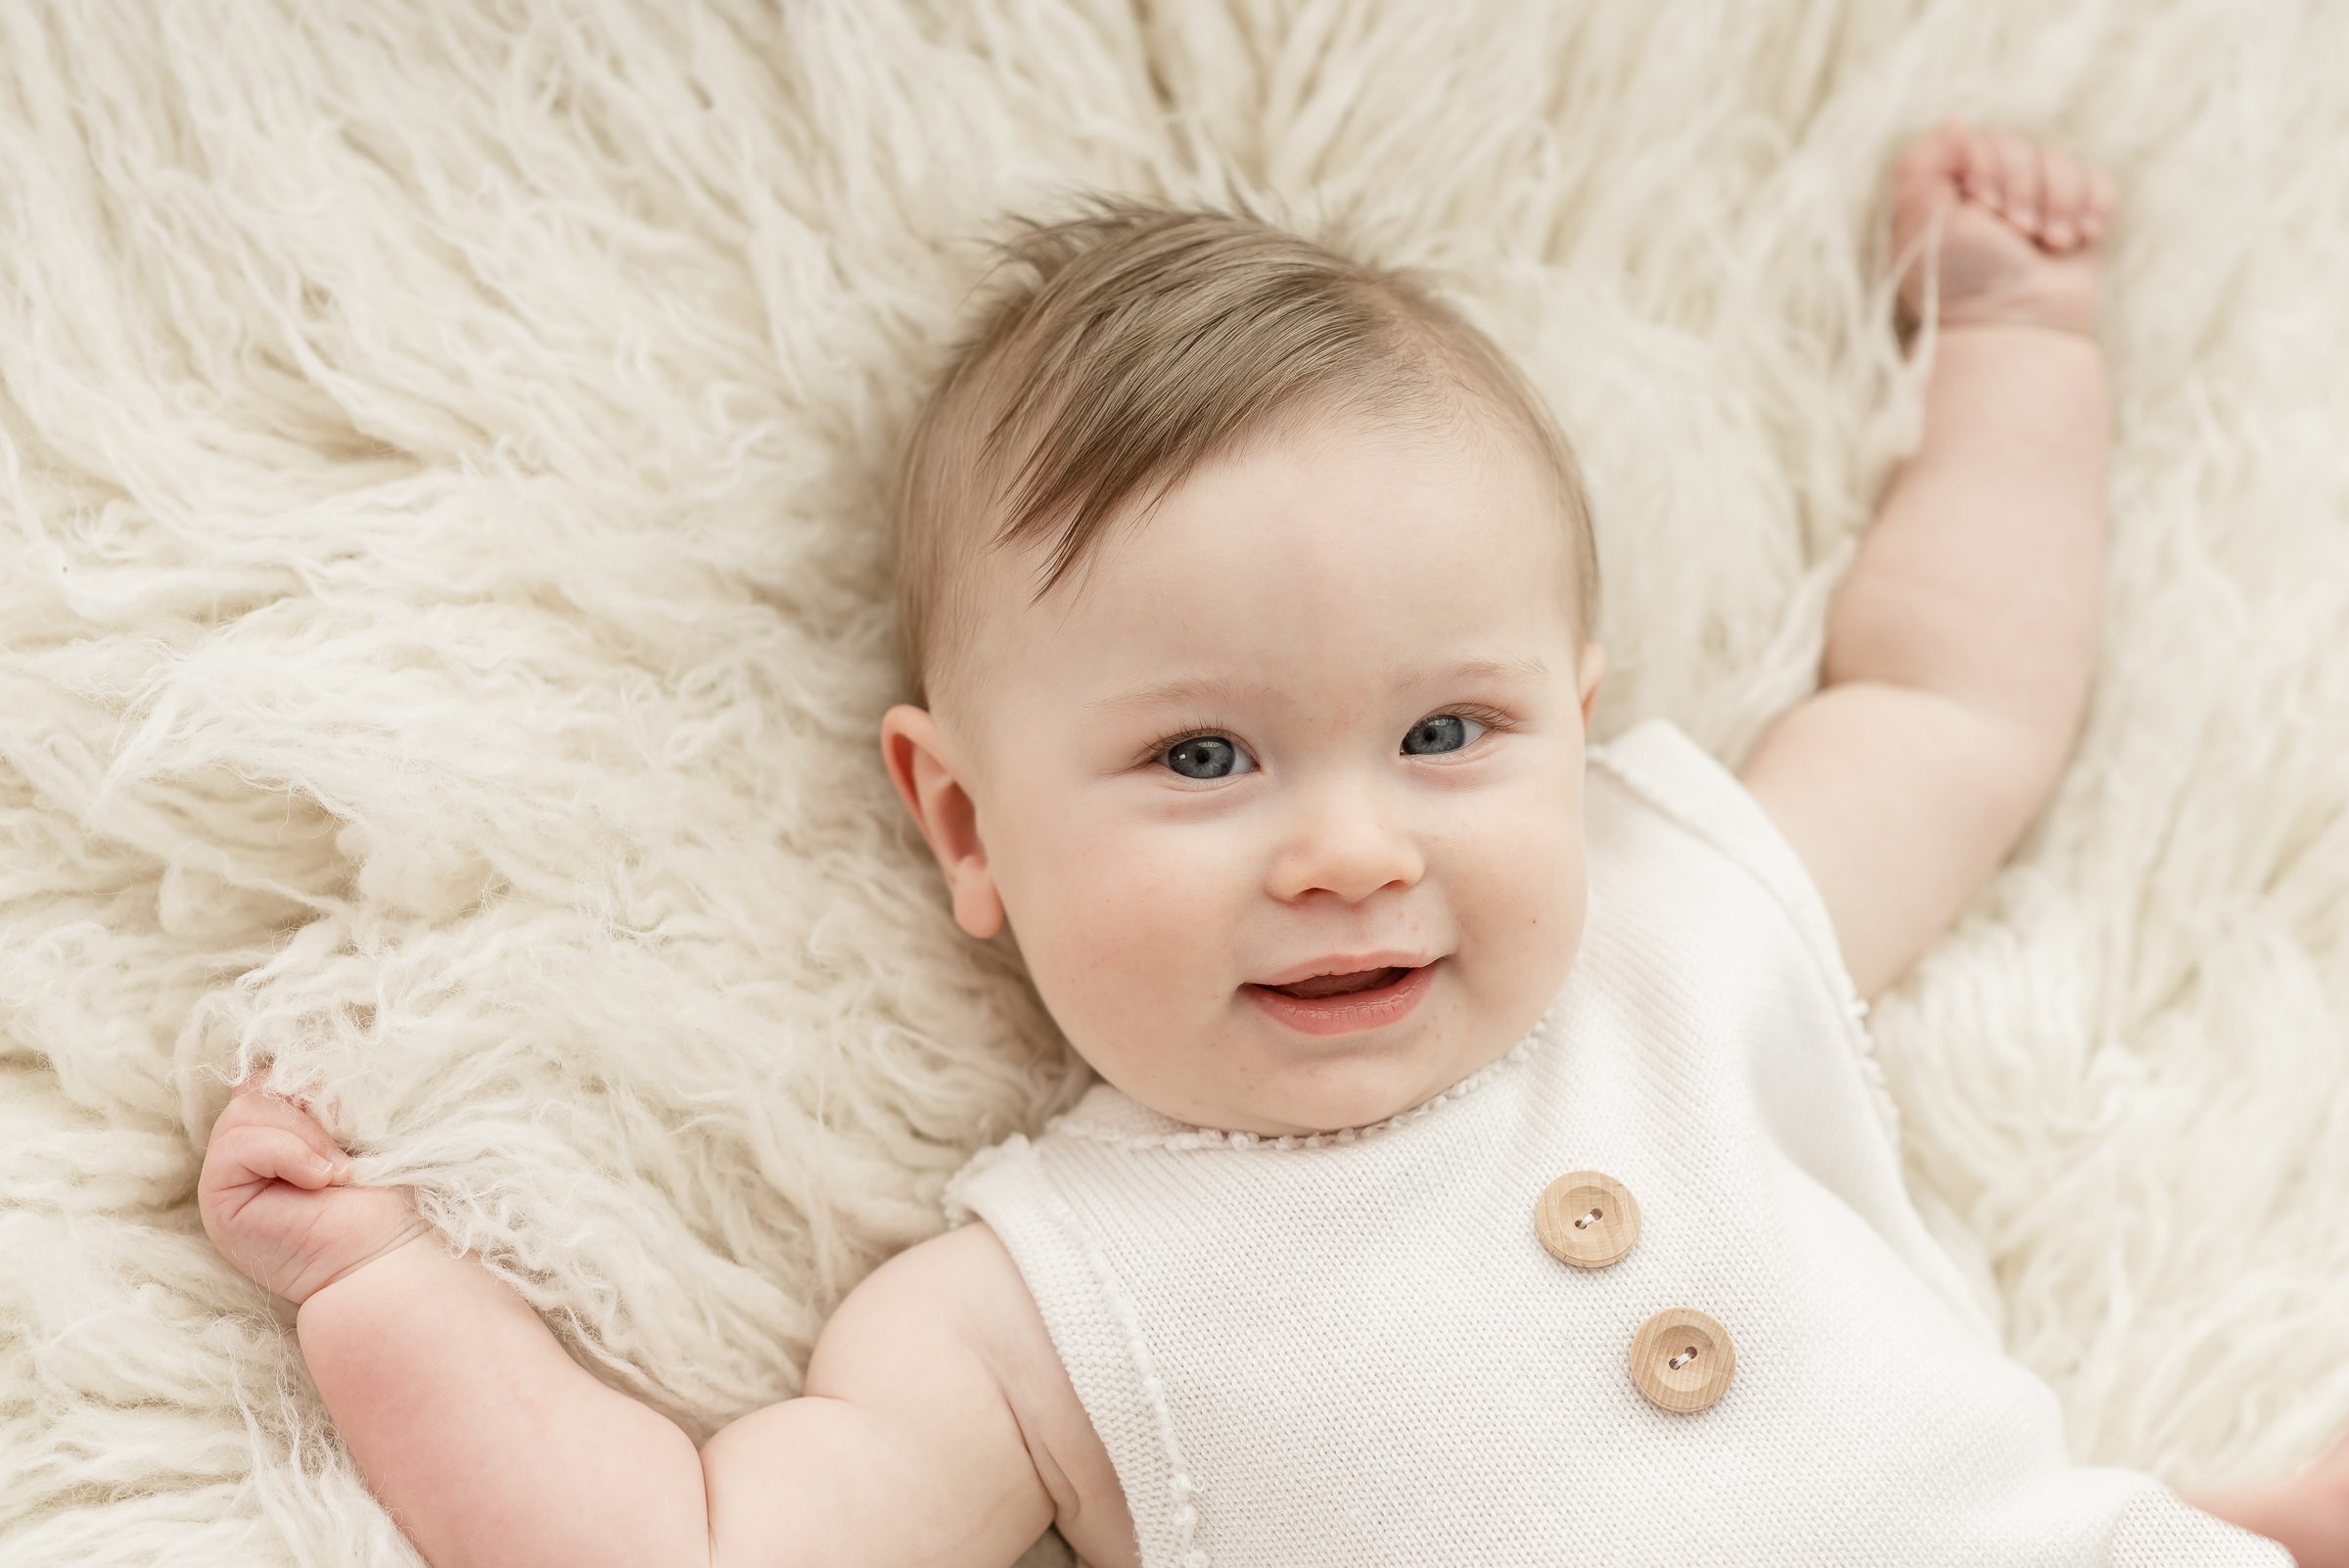 Six month old boy smiling at the camera on a white rug